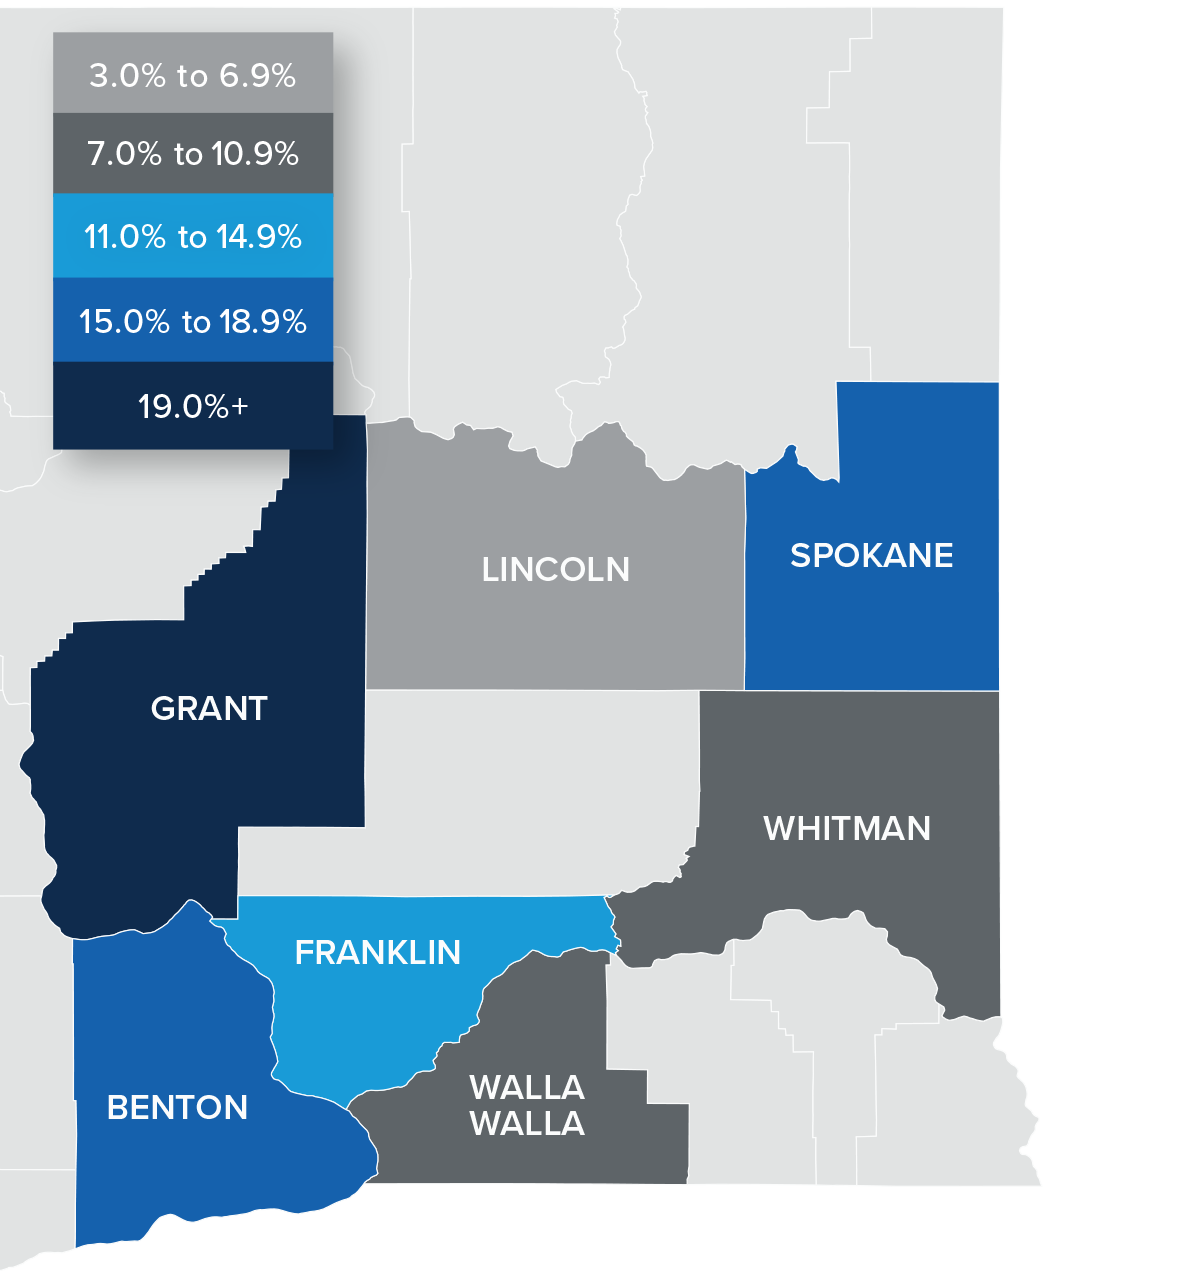 A map showing the real estate home prices percentage changes for various counties in Eastern Washington. Different colors correspond to different tiers of percentage change. Lincoln County is the only county with a percentage change in the 3% to 6.9% range, while Whitman and Walla Walla are in the 7% to 10.9% change range. Franklin County is the only county in the 11% to 14.9 % change range, Benton and Spokane are in the 15% to 18.9% change range, and Grant County is the only county in the 19% + change range.